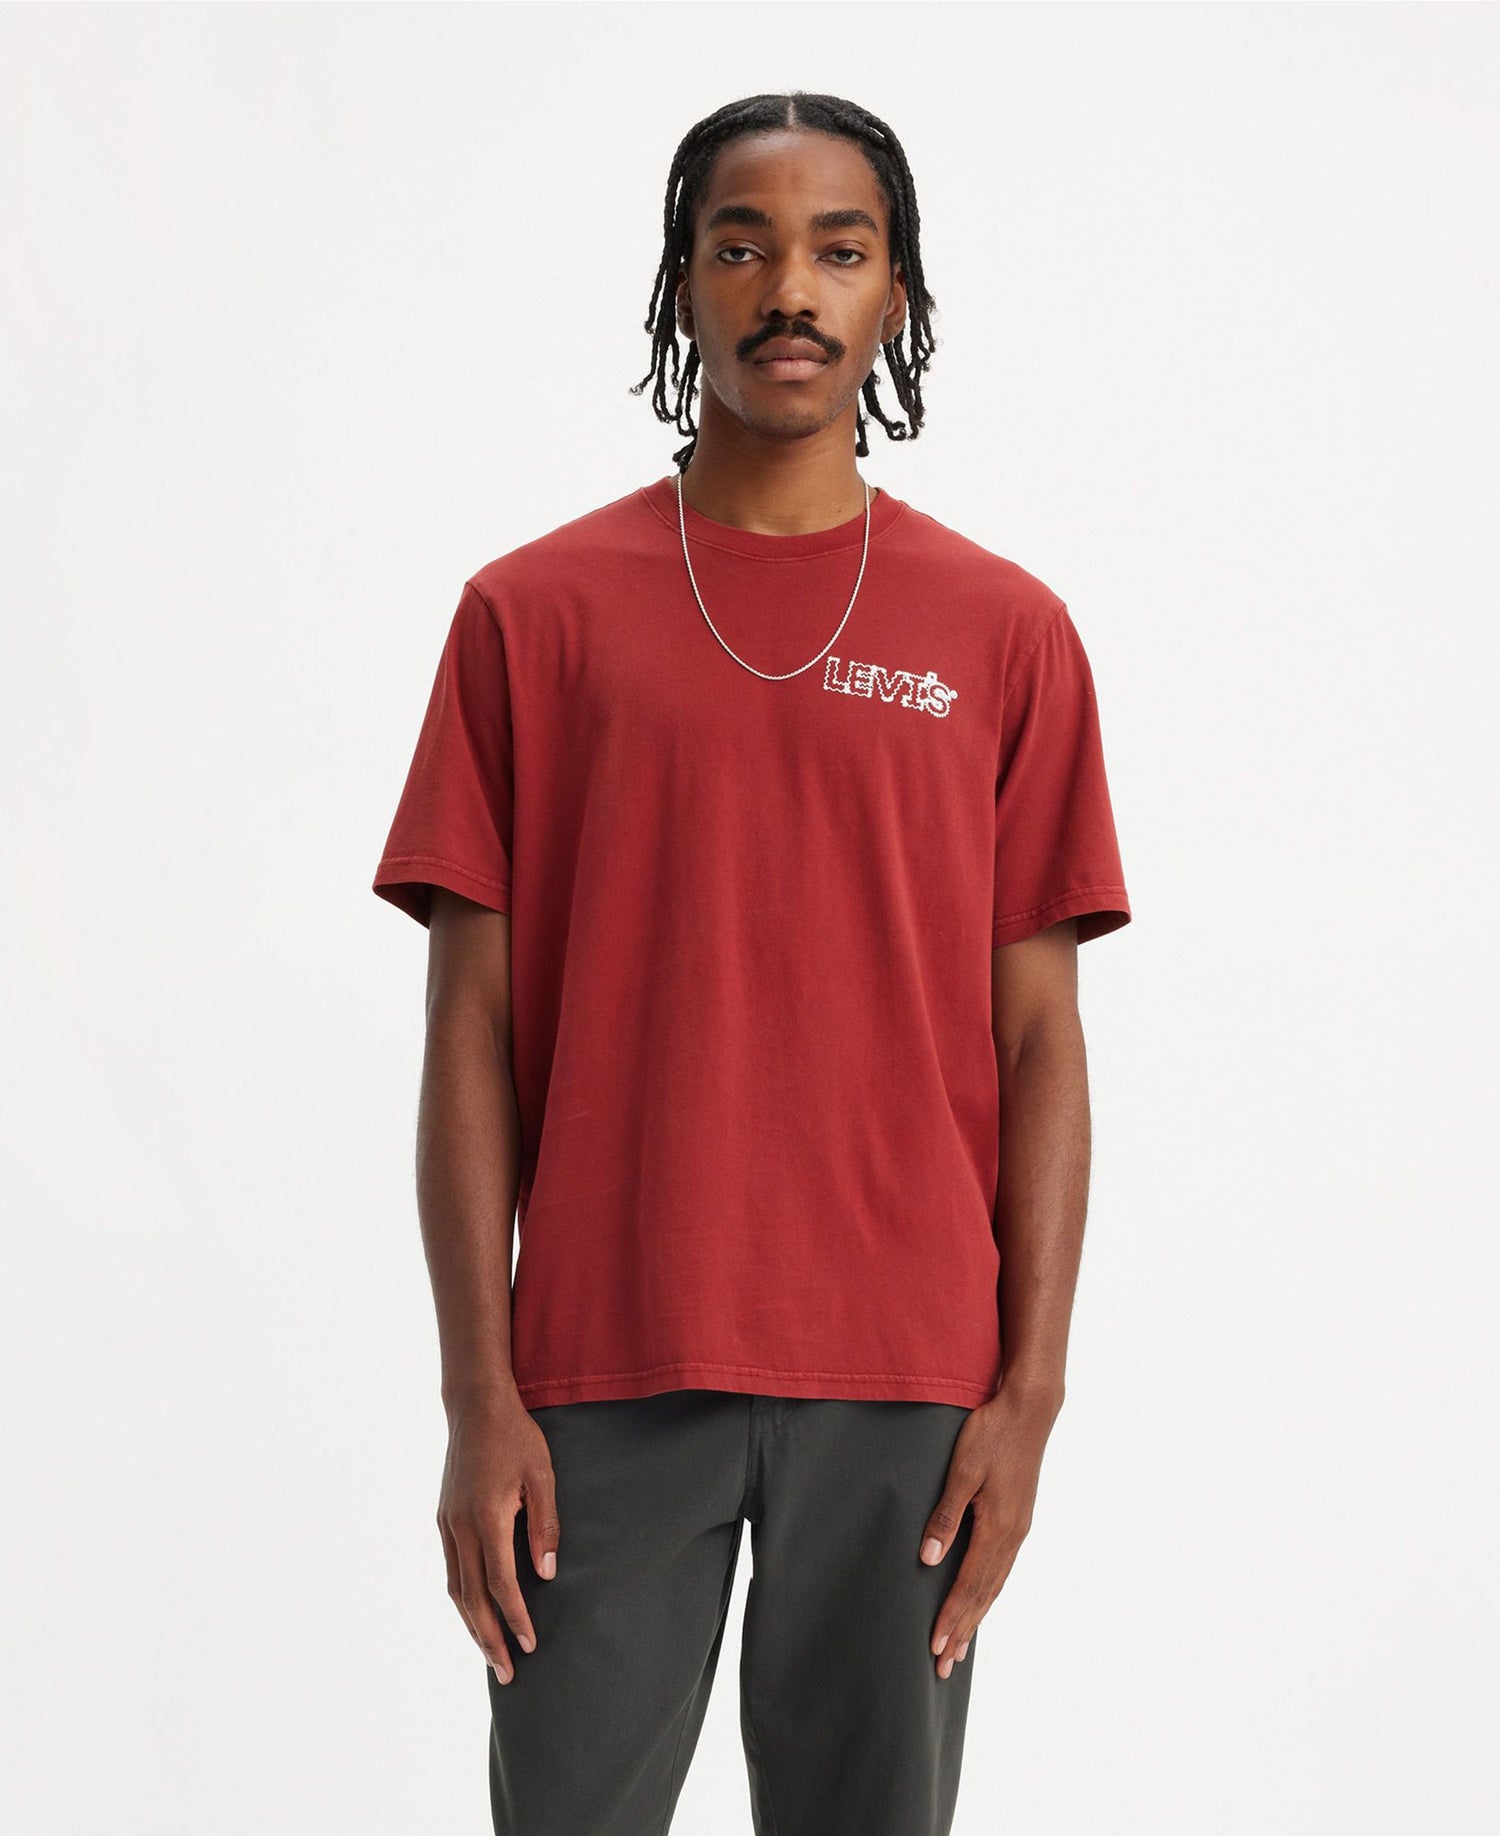 Relaxed Fit Short Sleeve T-Shirt - Sundried Tomato